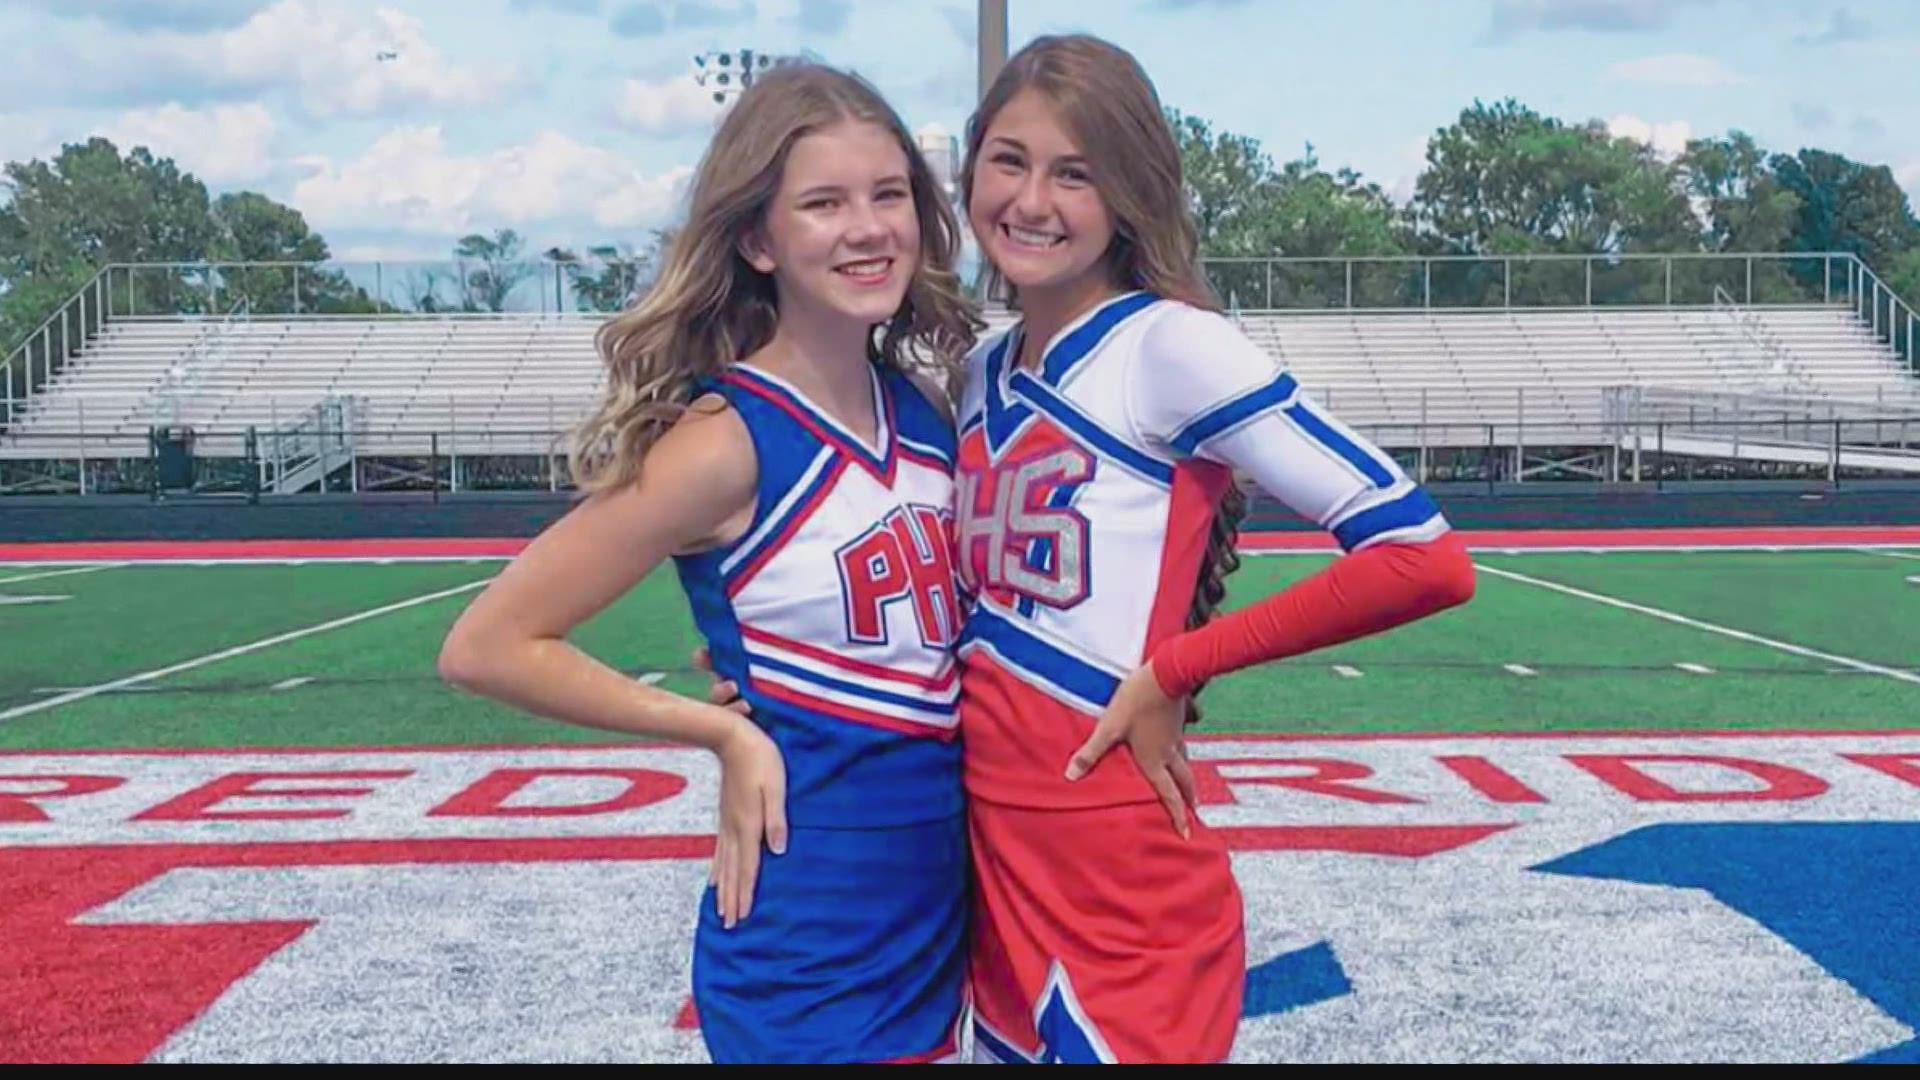 Two Plainfield cheerleaders told 13News they were disappointed by the decision.